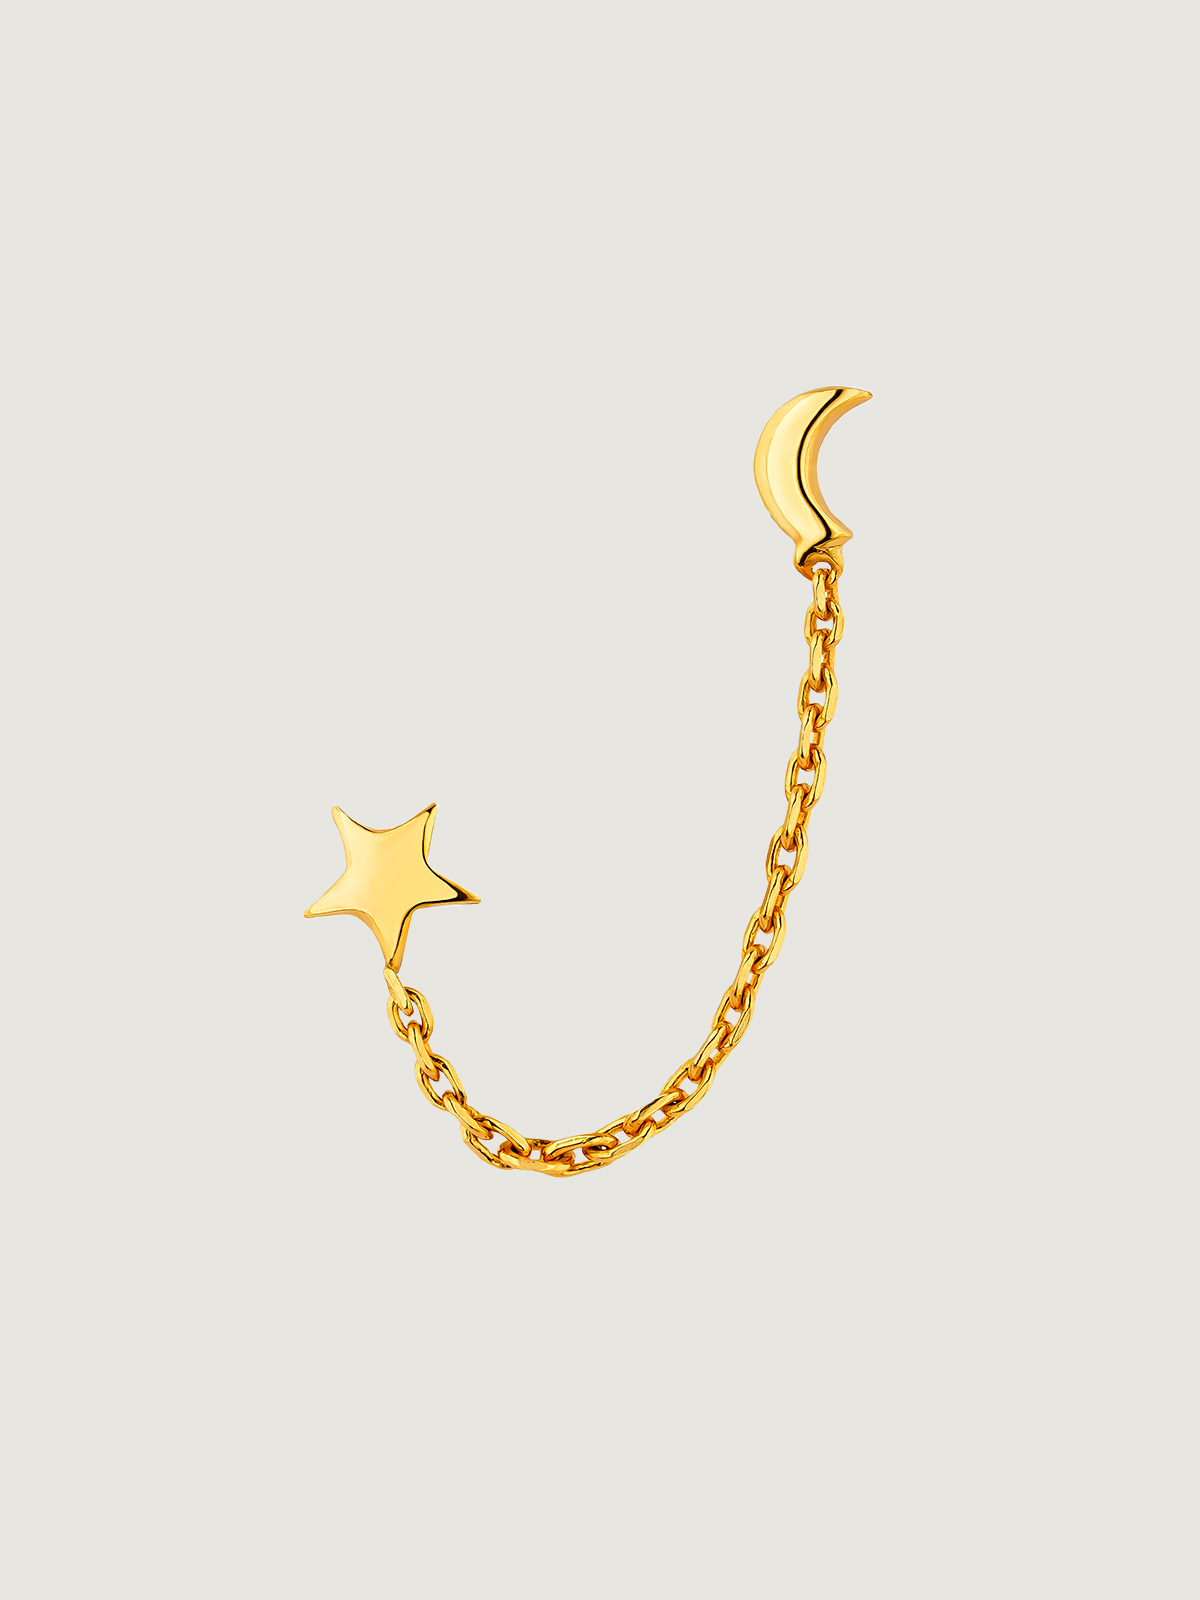 925 Silver Climber Earring plated in 18K yellow gold with moon and star.